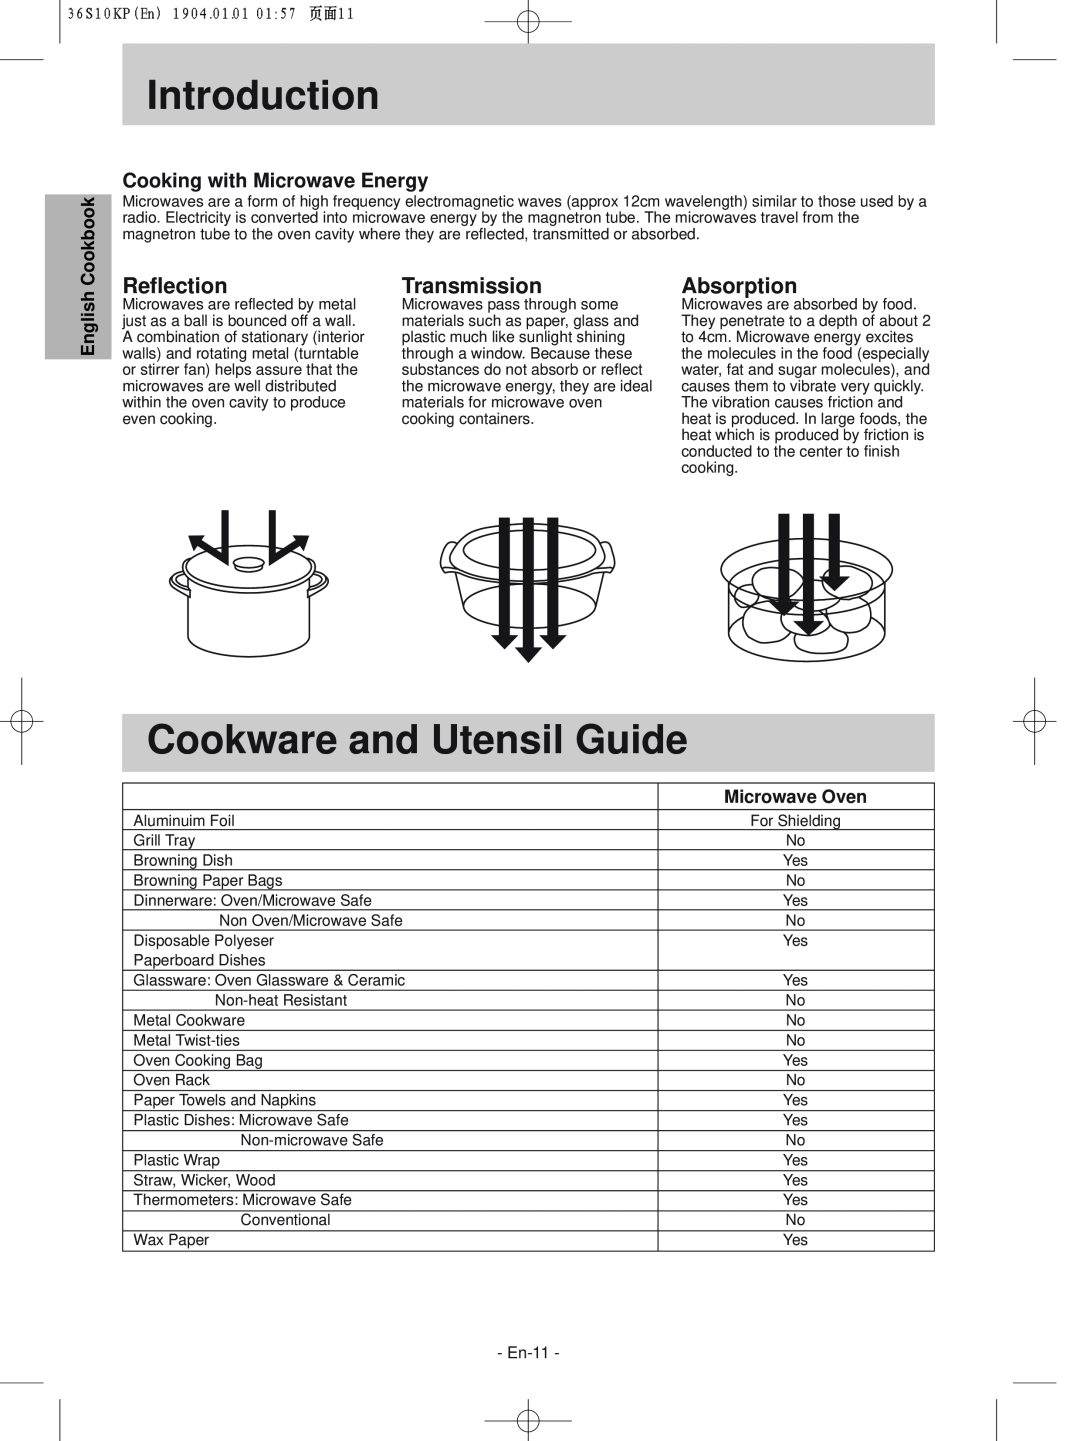 Panasonic NN-S235WF Introduction, Cookware and Utensil Guide, Reflection, Transmission, Absorption, Cookbook, English 